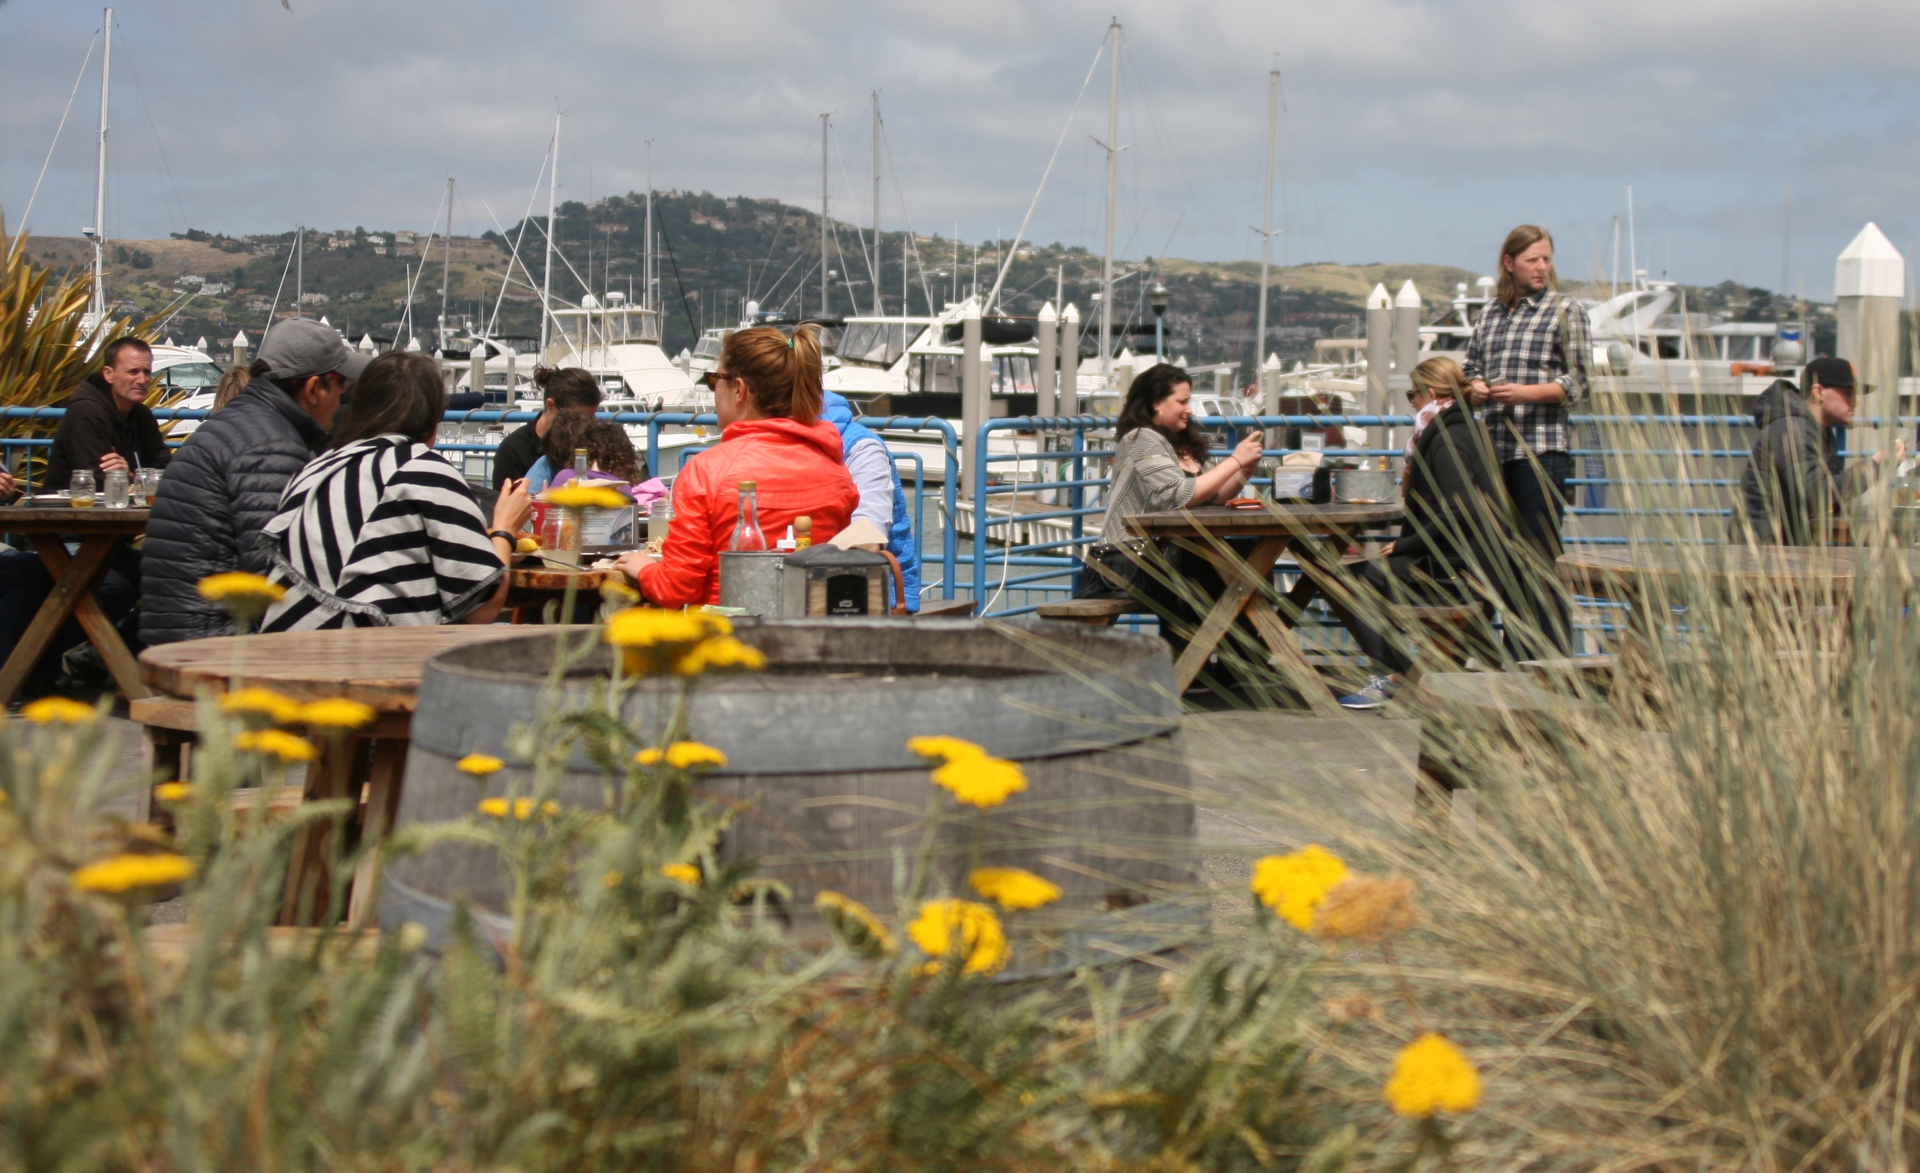 Ultra-casual outdoor dining on the Sausalito harbor at Fish.